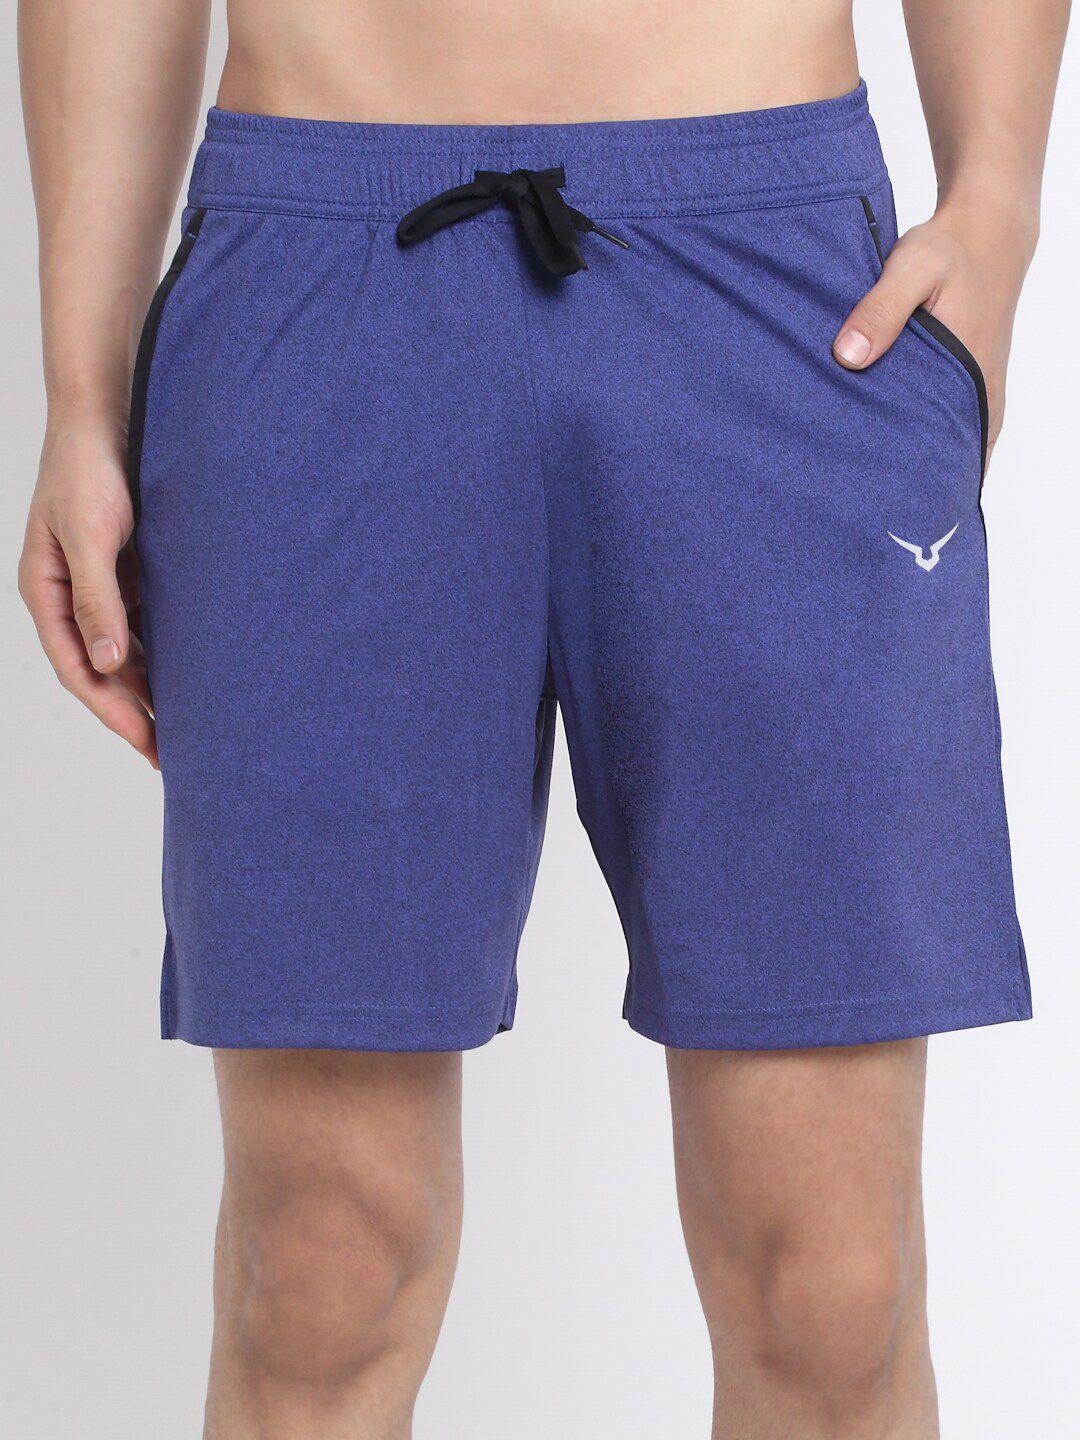 invincible men blue training or gym sports shorts